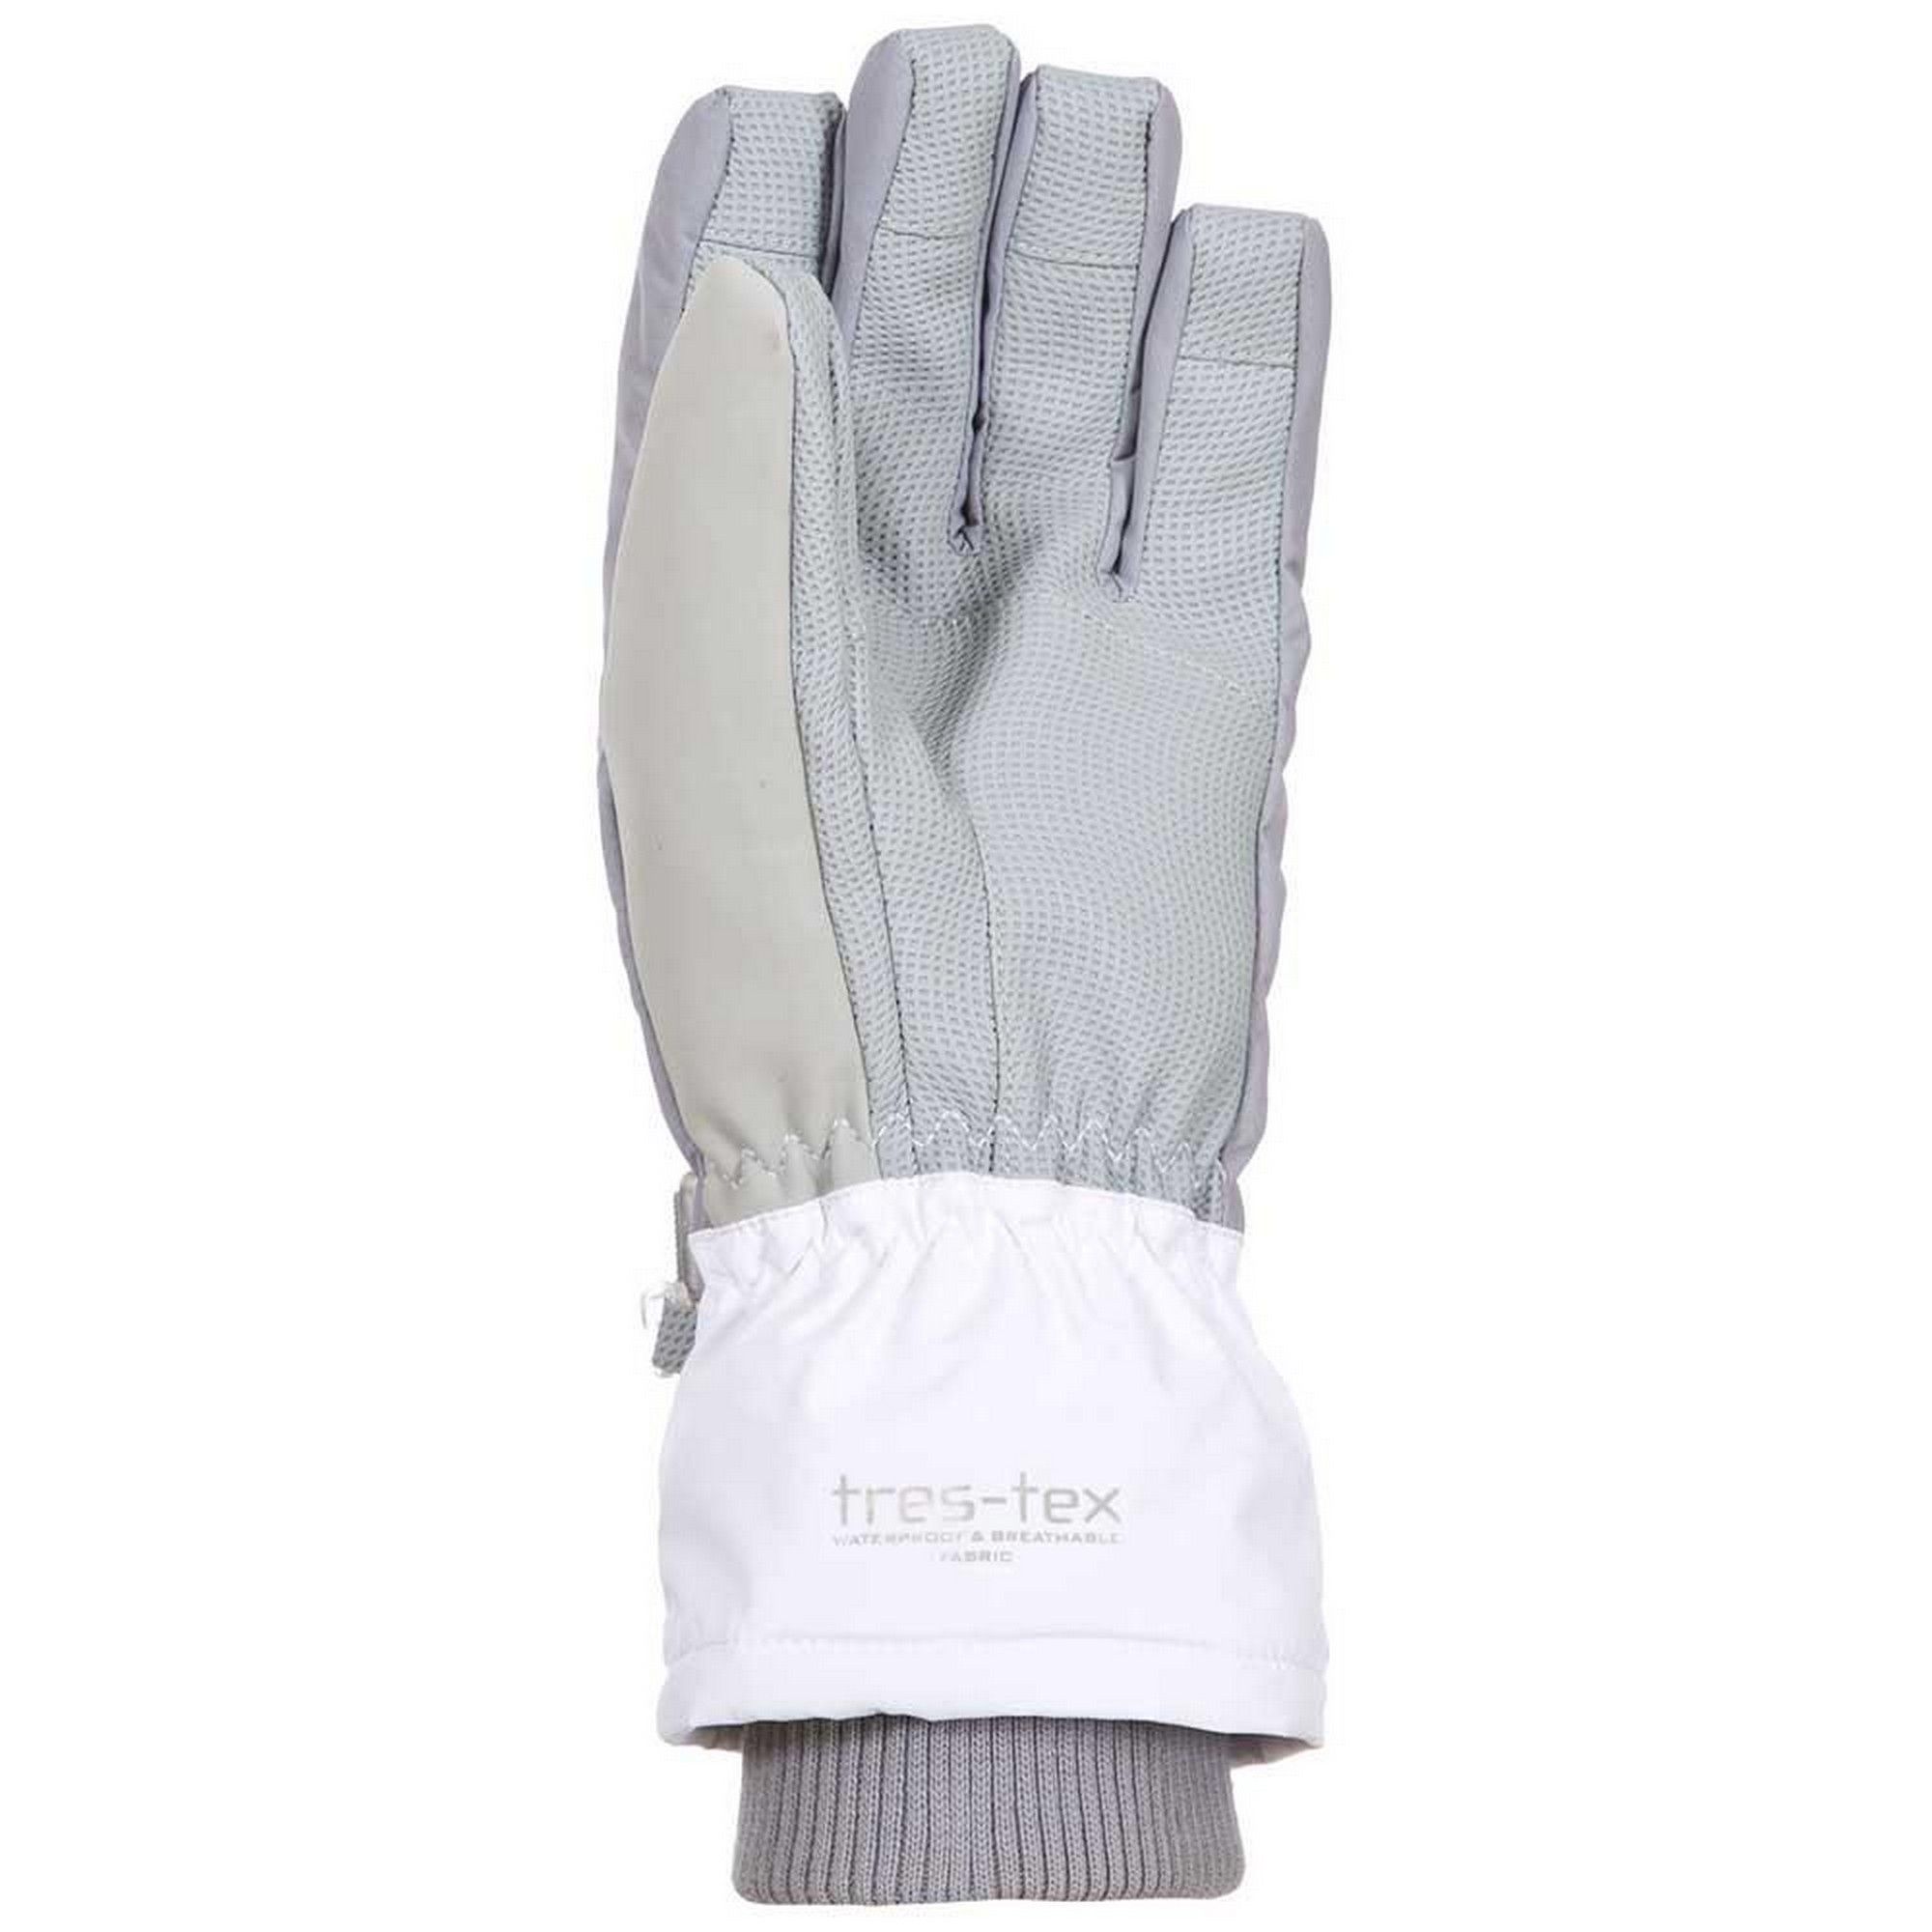 Lightly padded waterproof and breathable gloves. Adjustable wrist strap. Adjustable glove retainer. Goggle wipe functionality. Material: Shell: 100% Polyester. Palm: 100% Polyurethane. Lining: 100% Polyester. Filling: 100% Polyester.